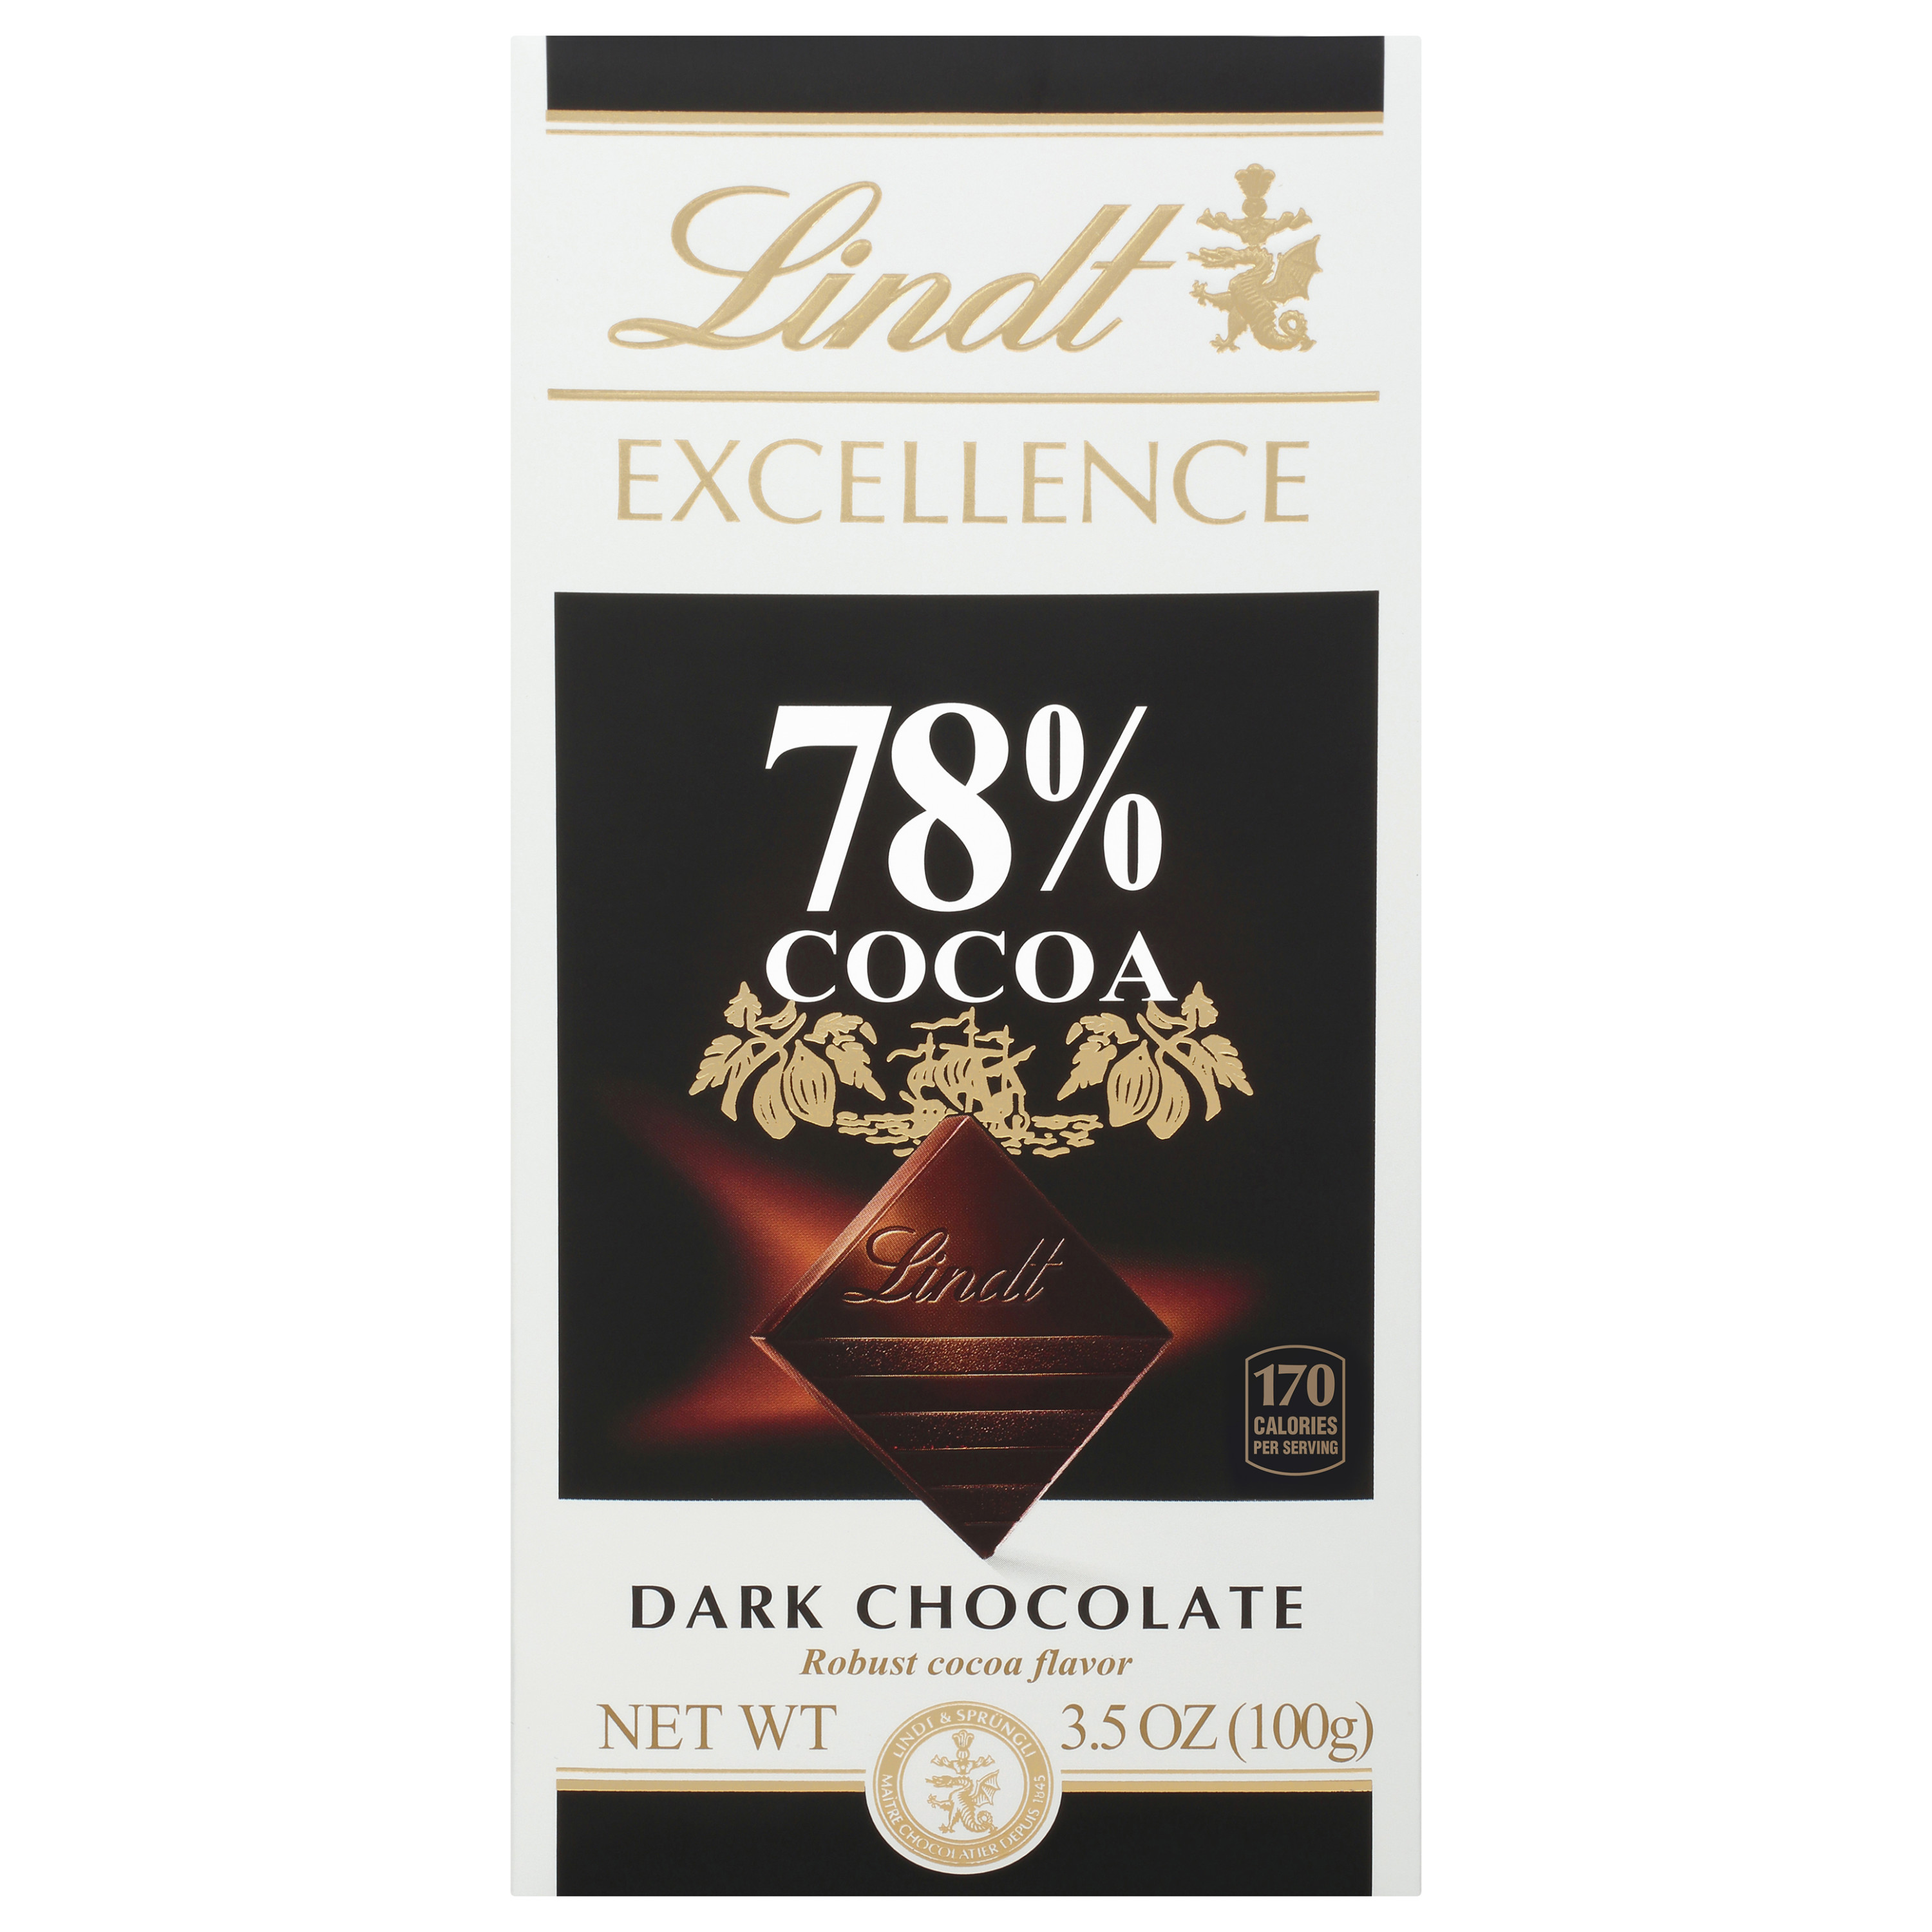 Lindt EXCELLENCE 78% Cocoa Dark Chocolate Bar, Easter Chocolate Candy, 3.5 oz. - image 1 of 16